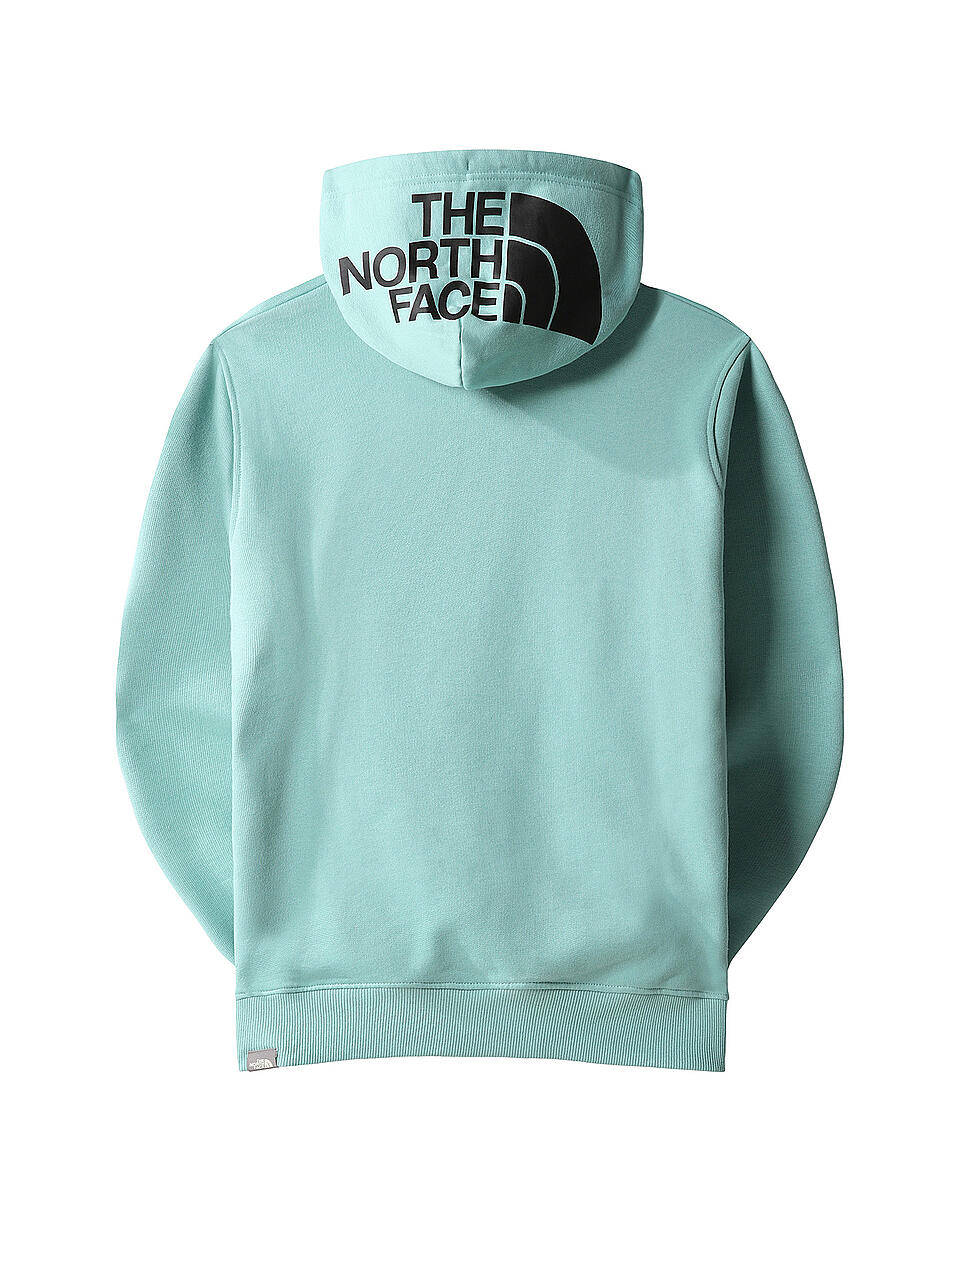 THE NORTH FACE | Kapuzensweater - Hoodie  | mint